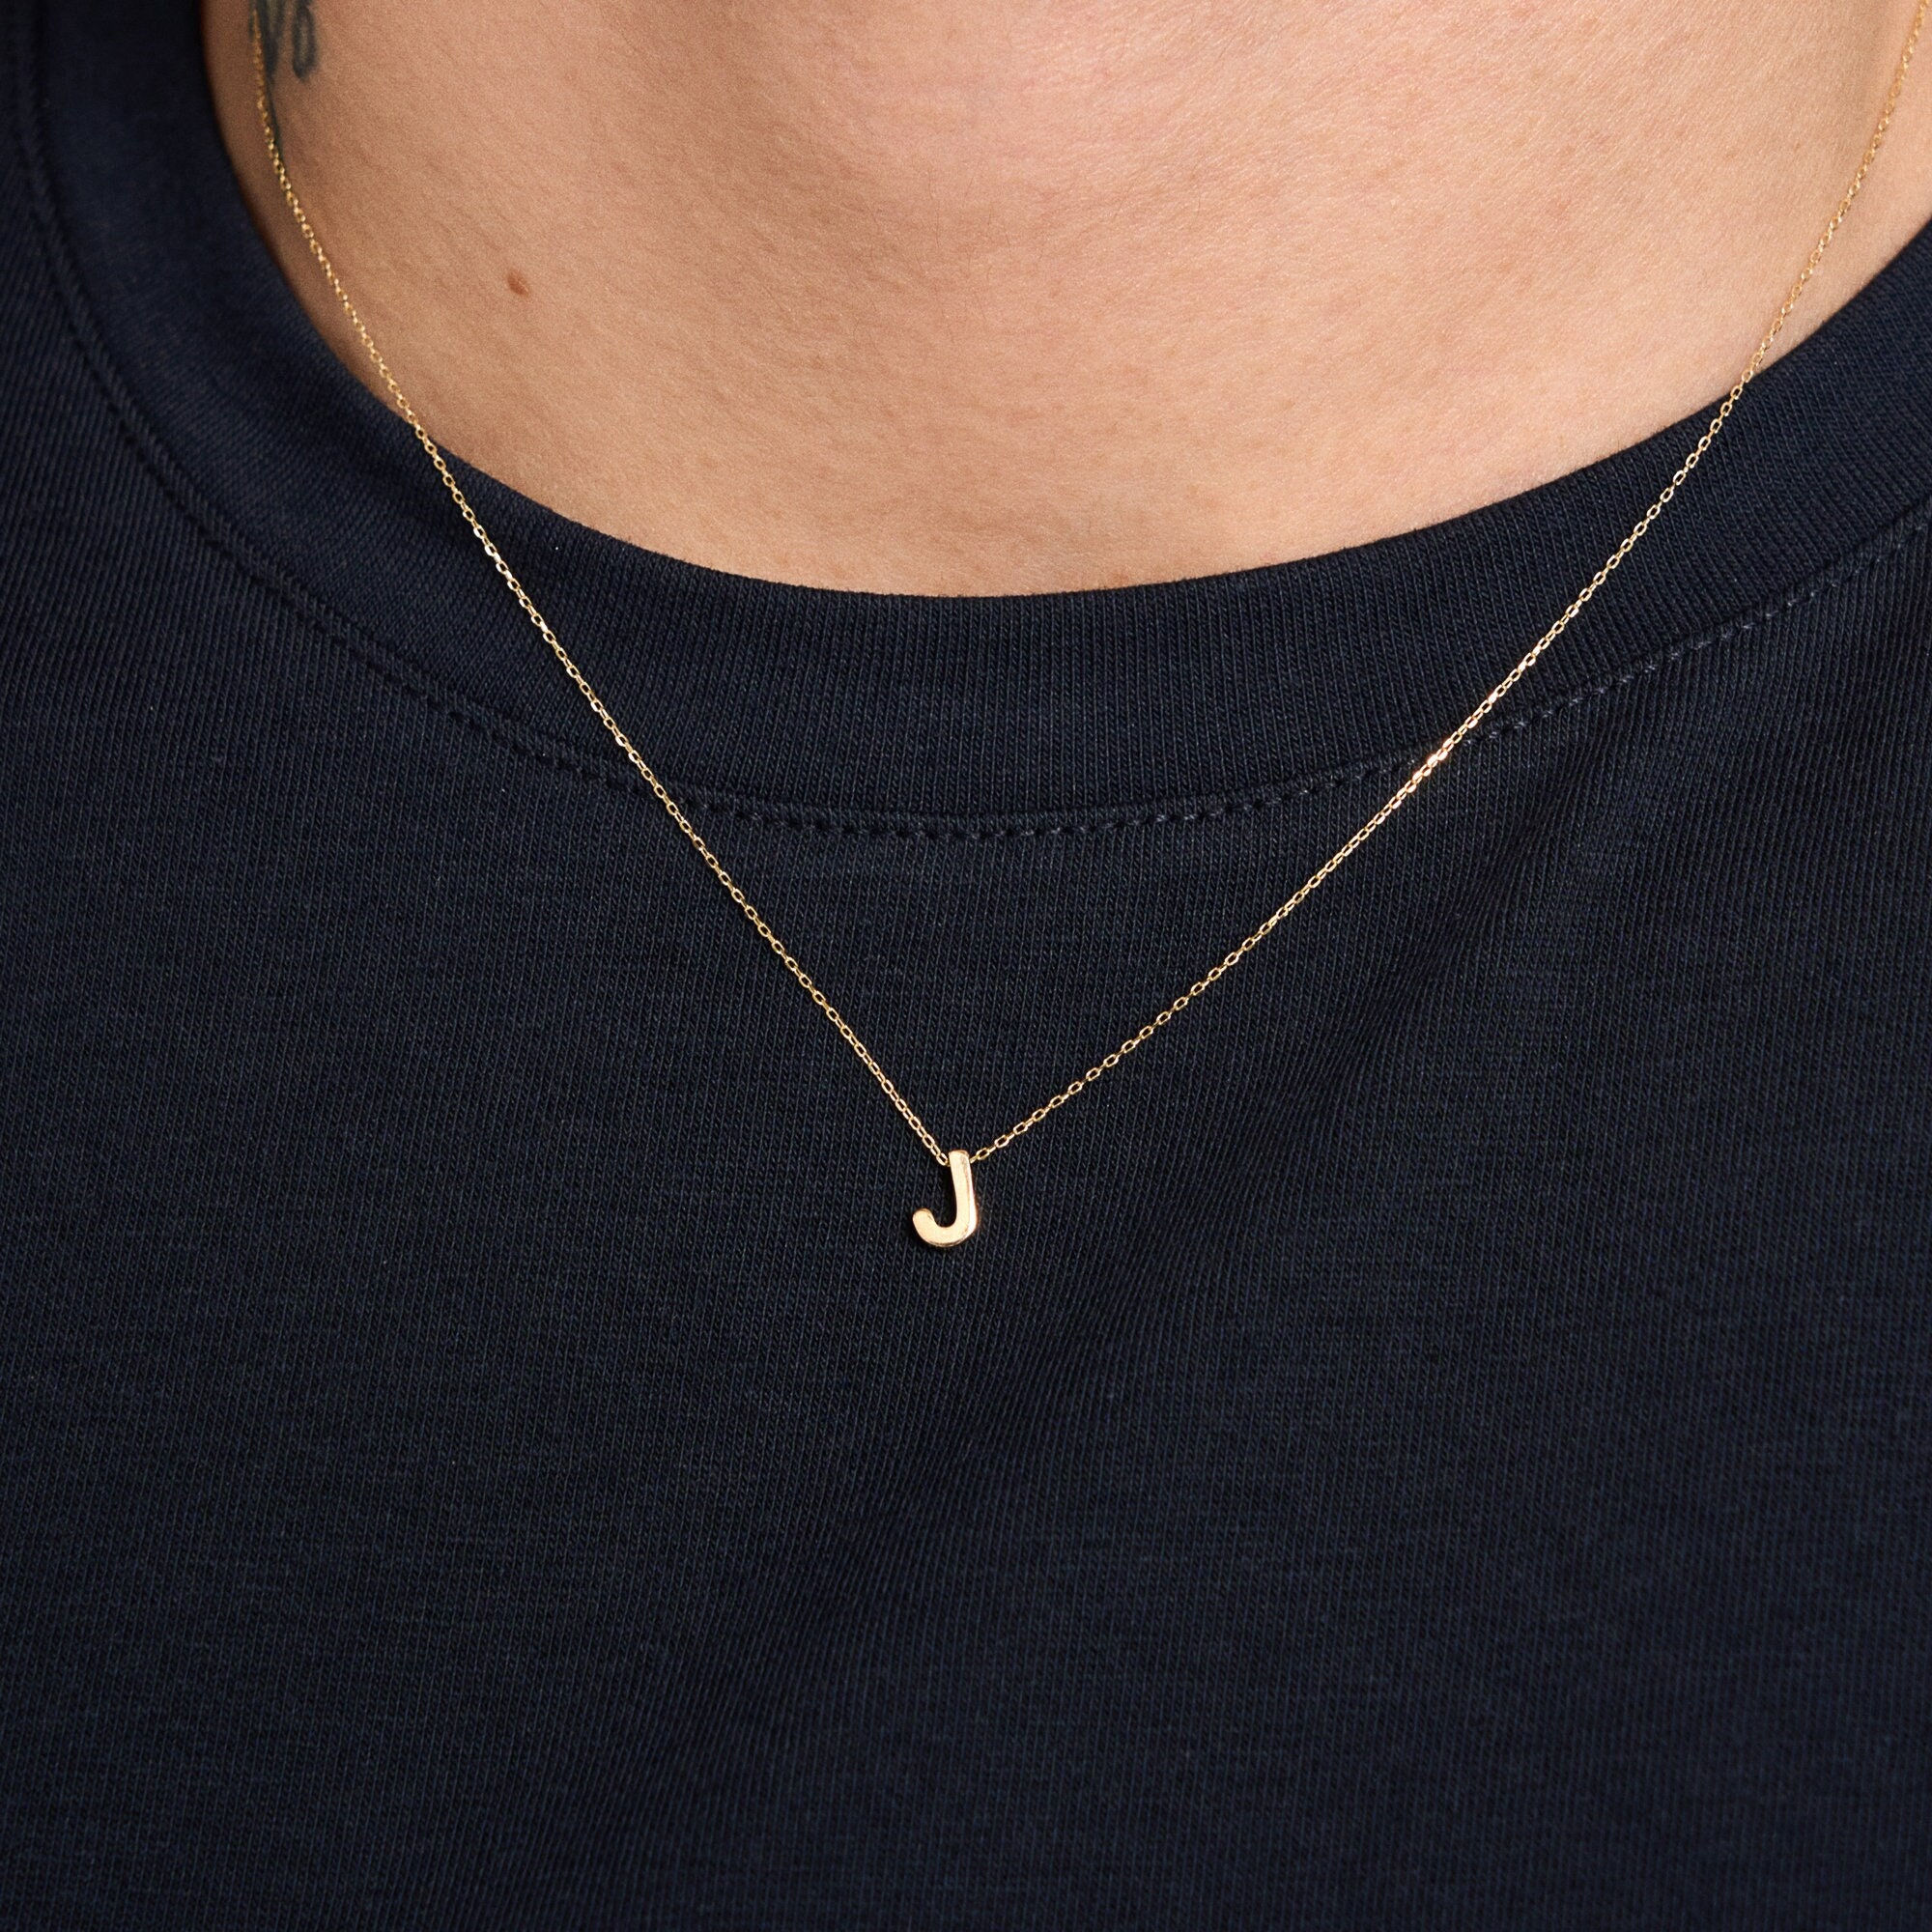 14k Gold Monogram Necklace,Personalized Necklace,Personalized  Jewelry,Personalized Gift,Letter Necklace-Initial Necklace-JX04